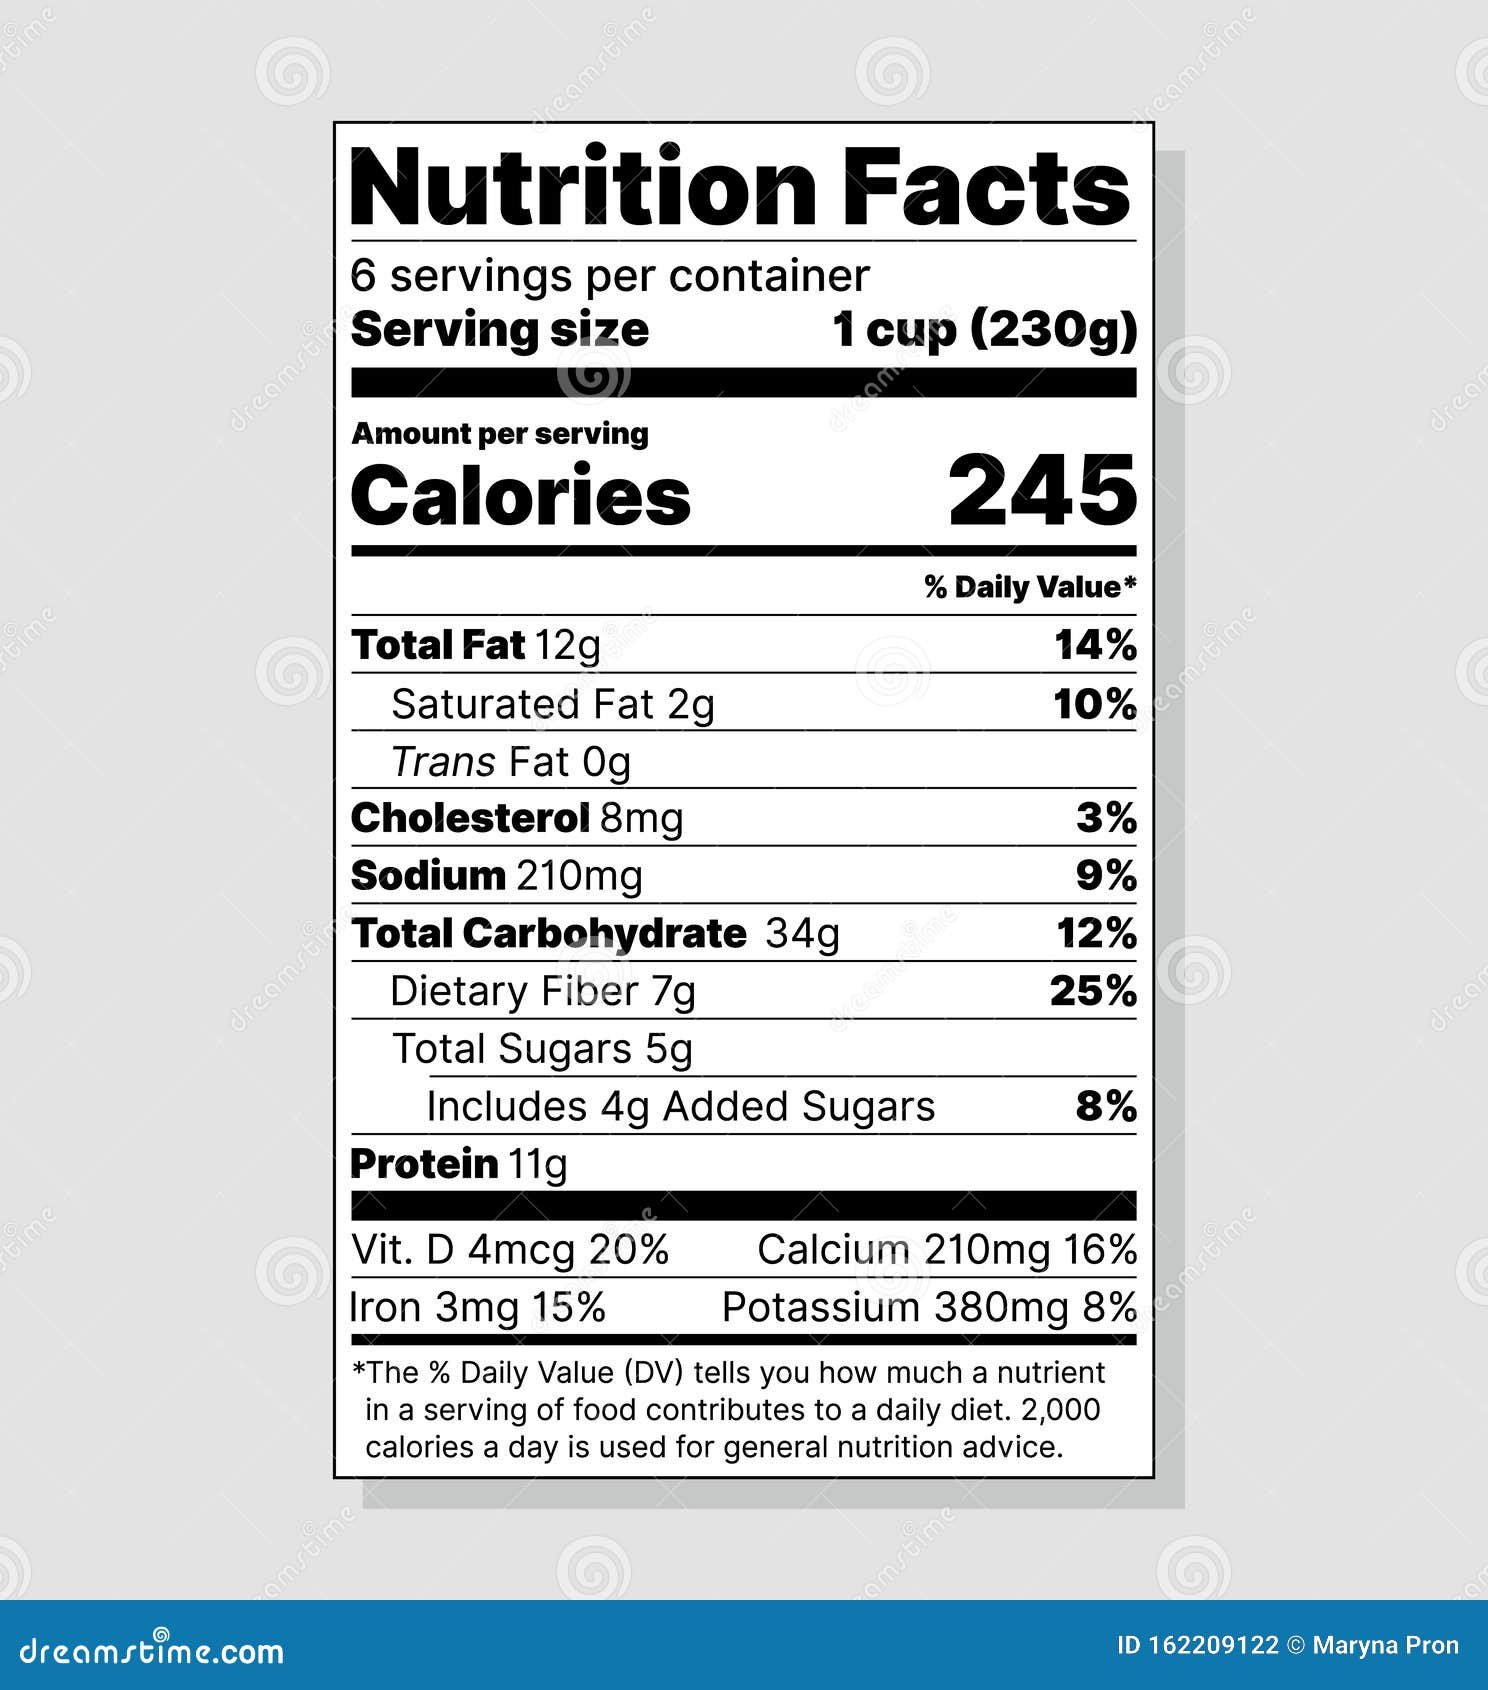 Nutrition Facts Label. Vector Illustration. Tables Food Information Stock Vector - Illustration ...